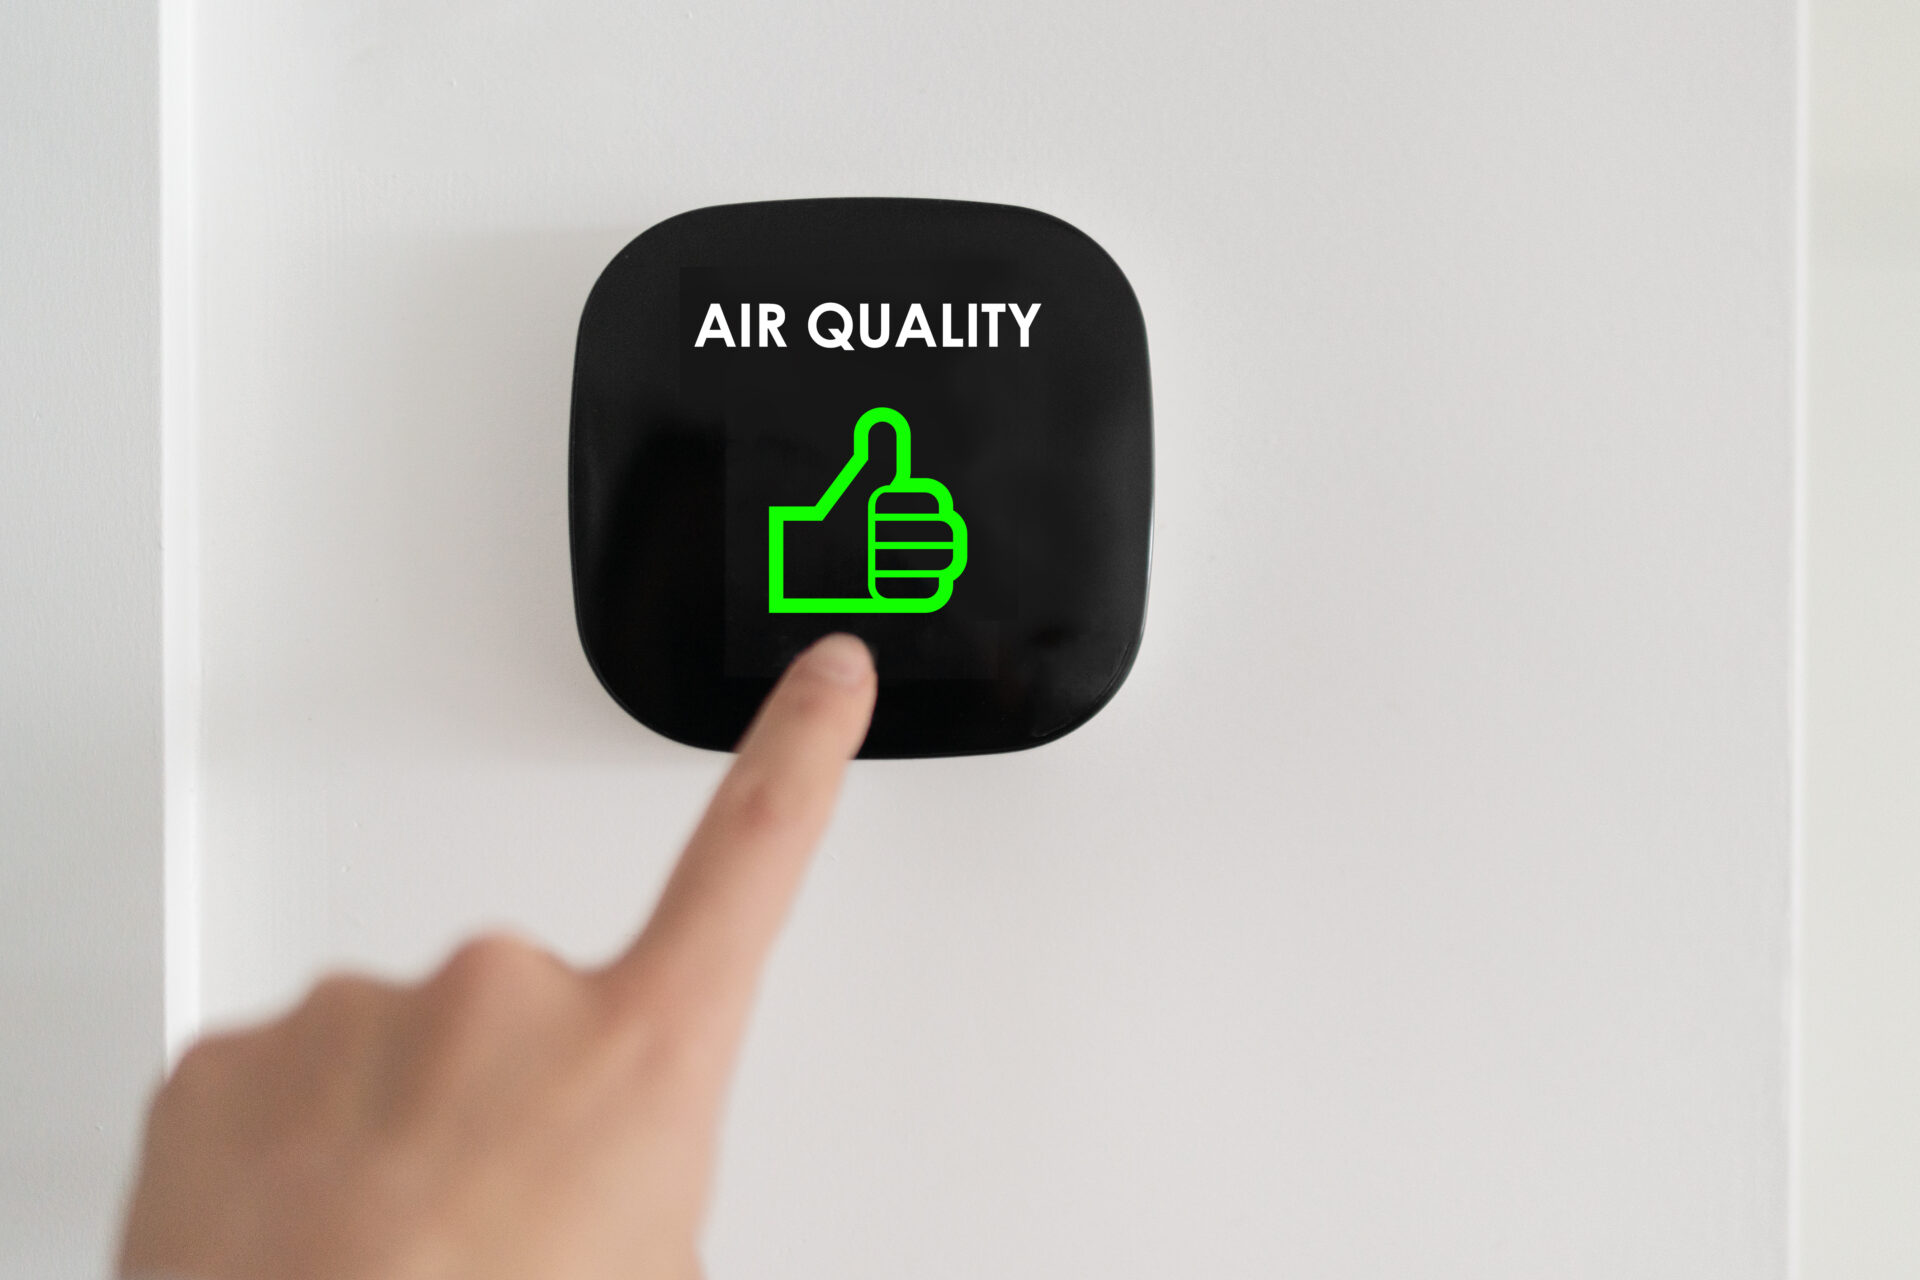 A smart home device shows that the air quality is excellent